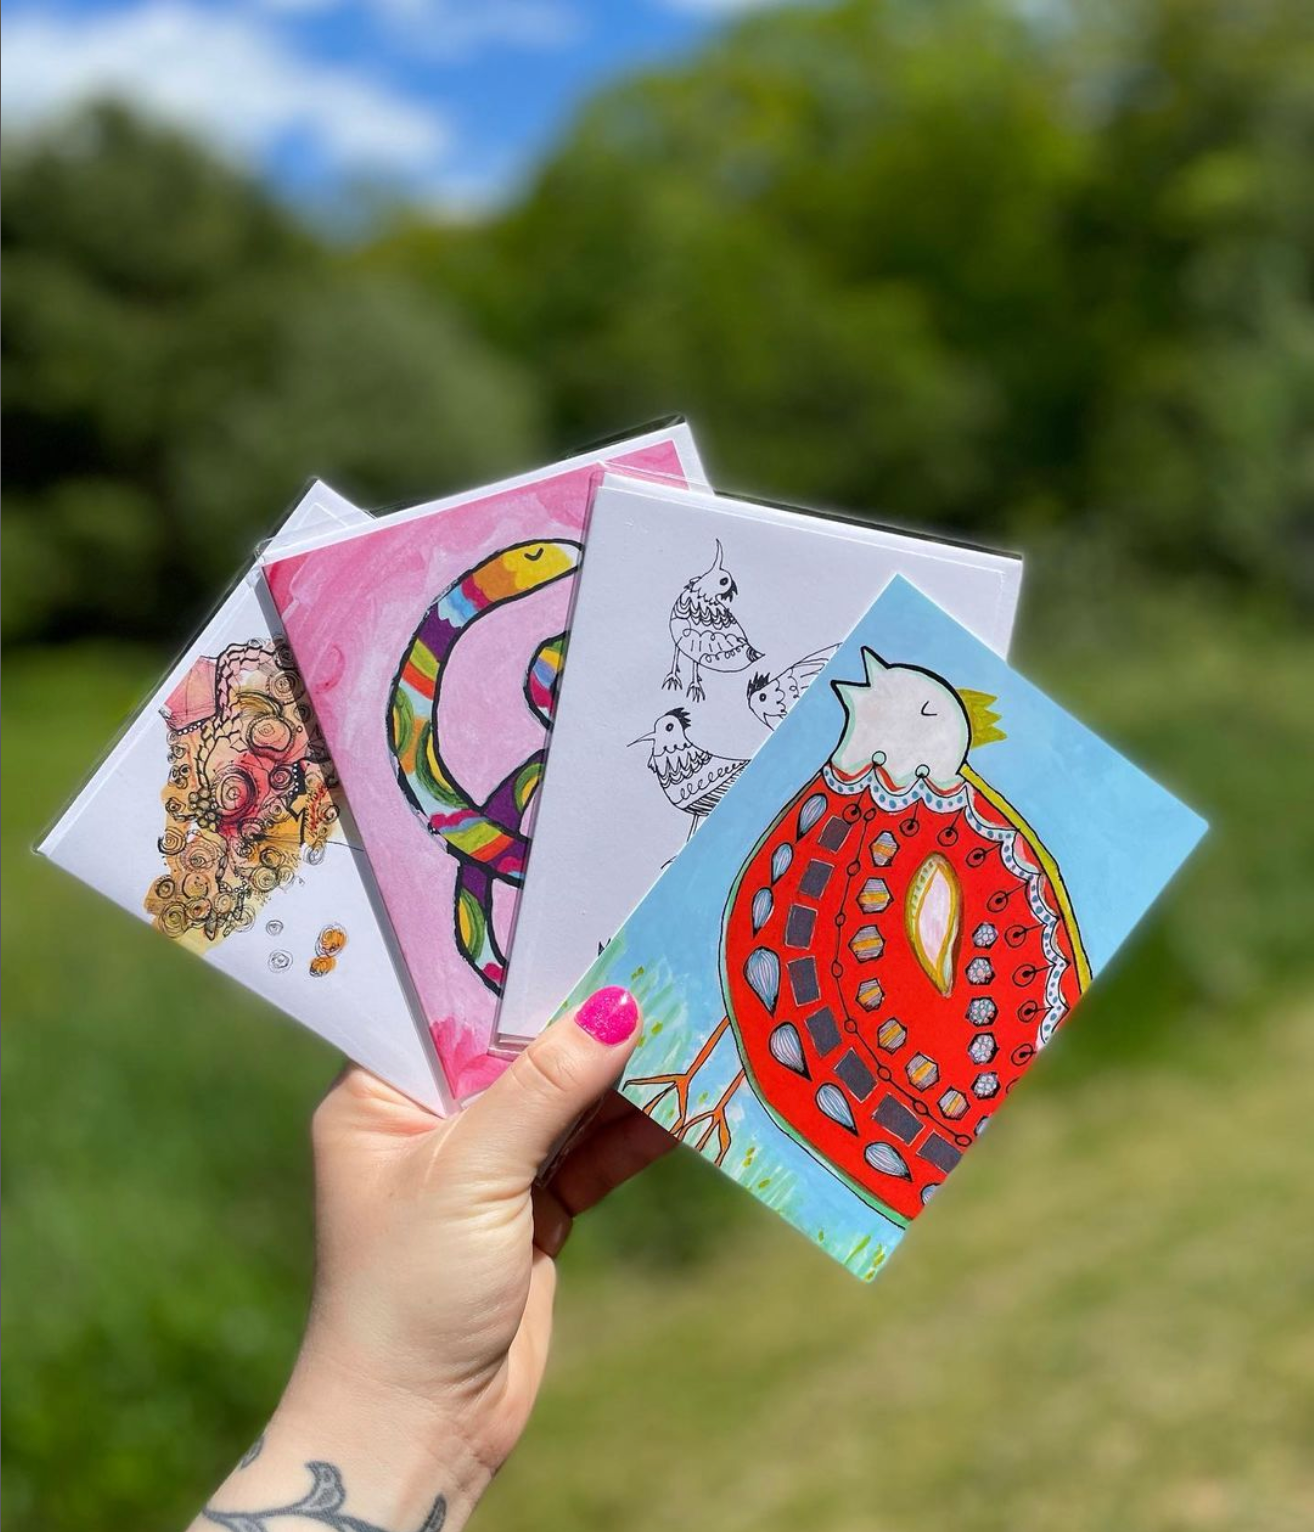 Hana Firestone colorful illustrated greeting cards held by a hand with pink nails and tattoos against a background of green trees and a blue sky